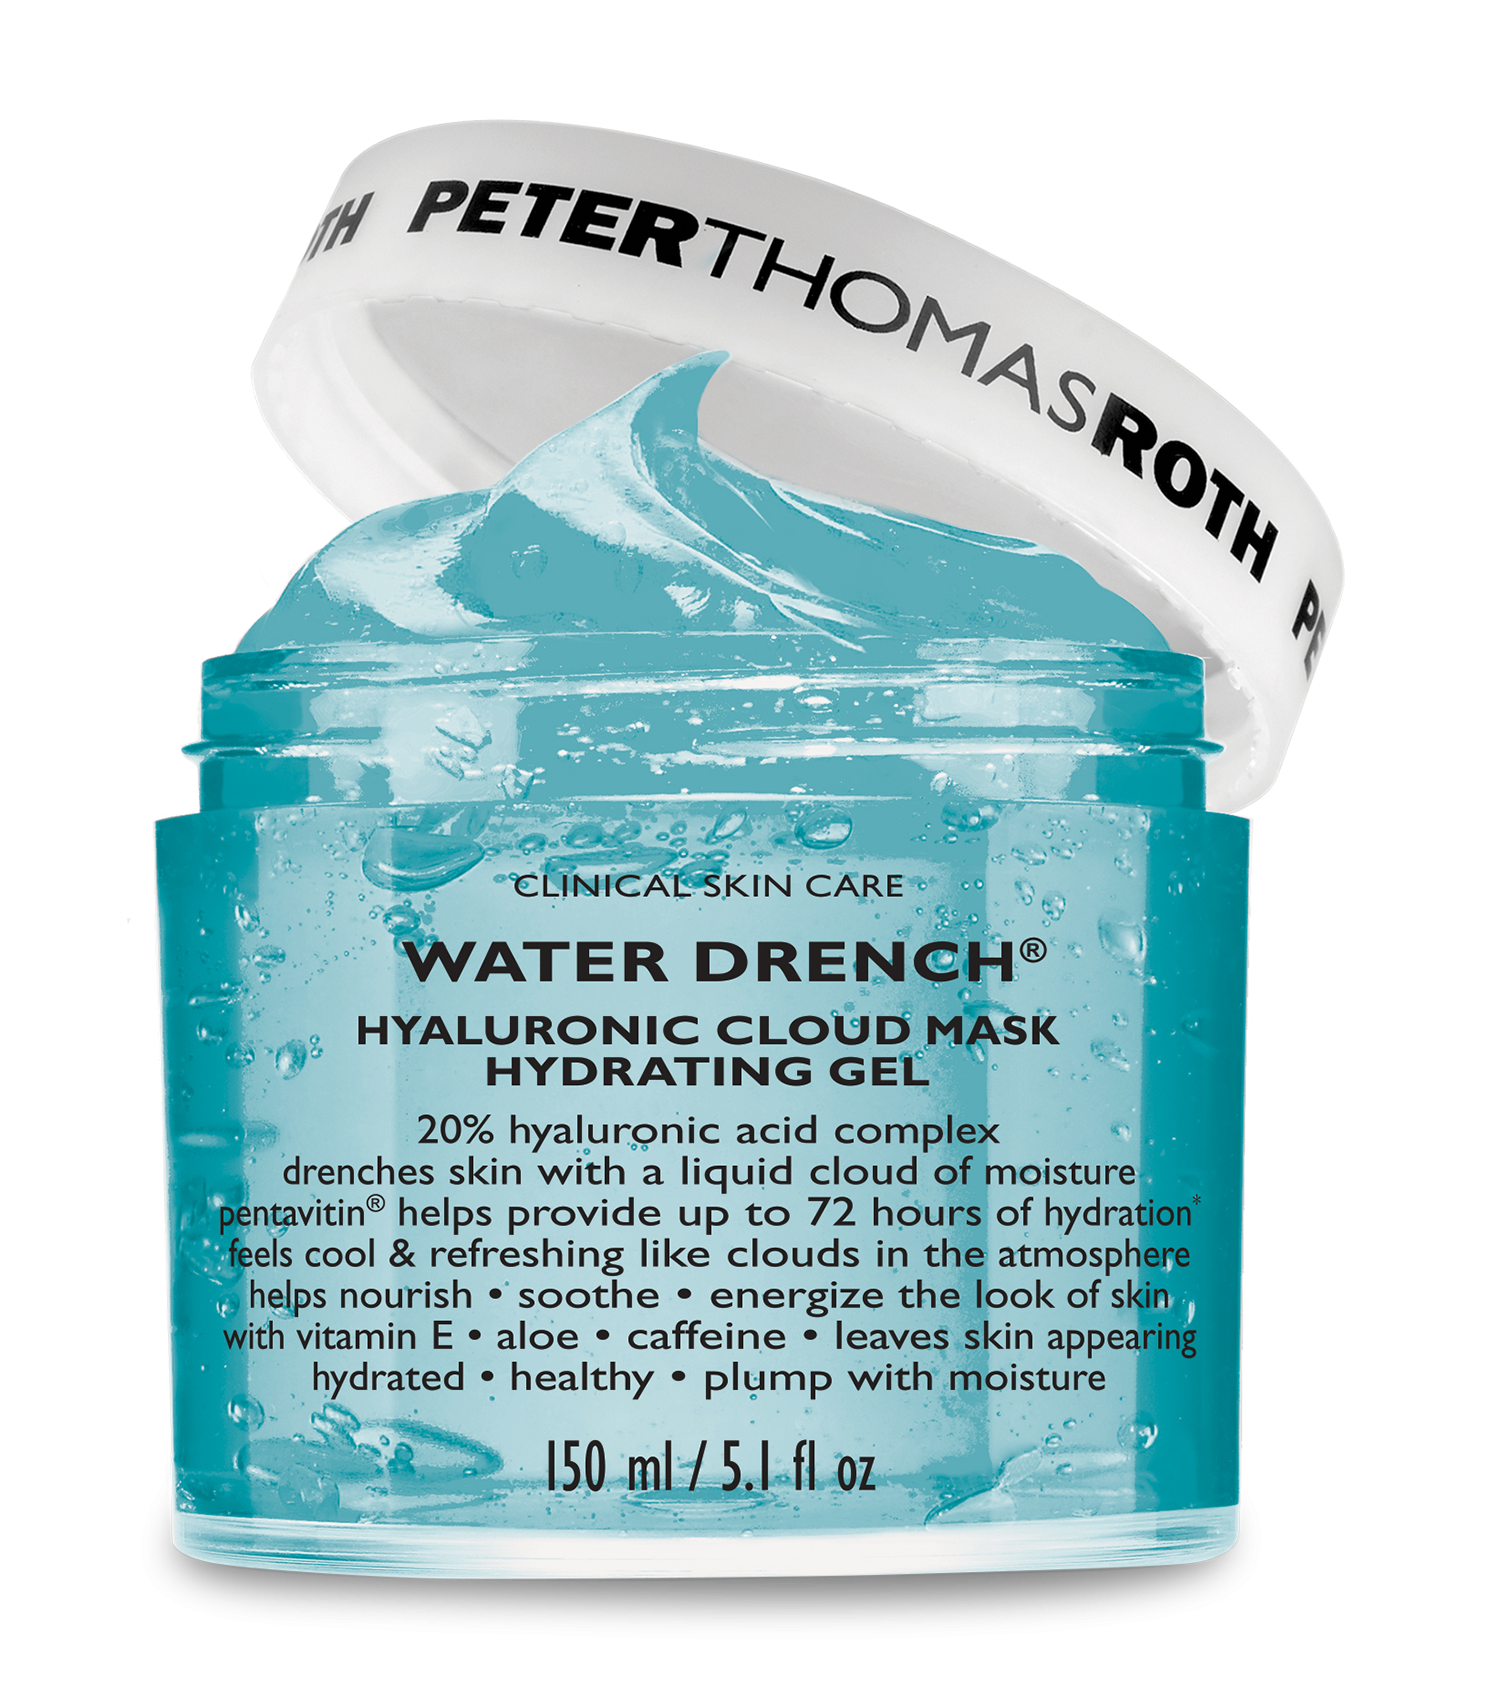 PETER THOMAS ROTH Water Drench Hyaluronic Cloud Mask Hydrating Gel PETER THOMAS ROTH Water Drench Hyaluronic Cloud Mask Hydrating Gel 1